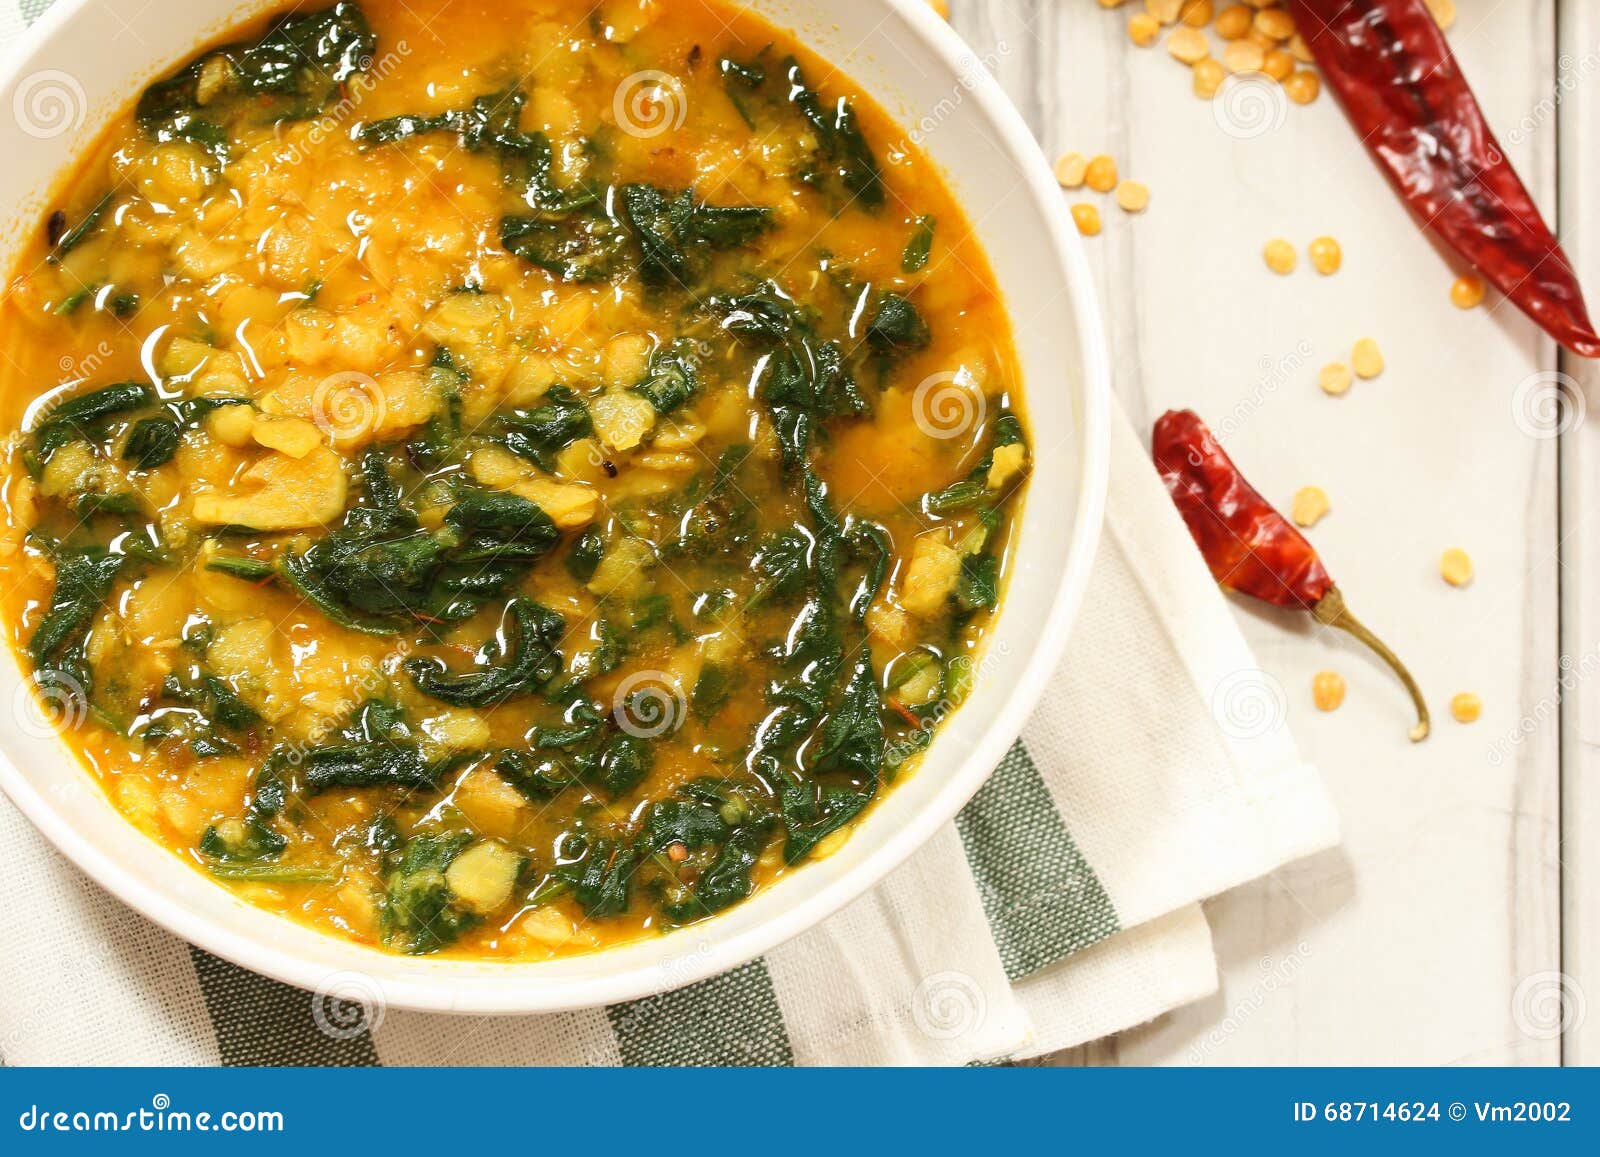 dal indian lentil curry soup with spinach